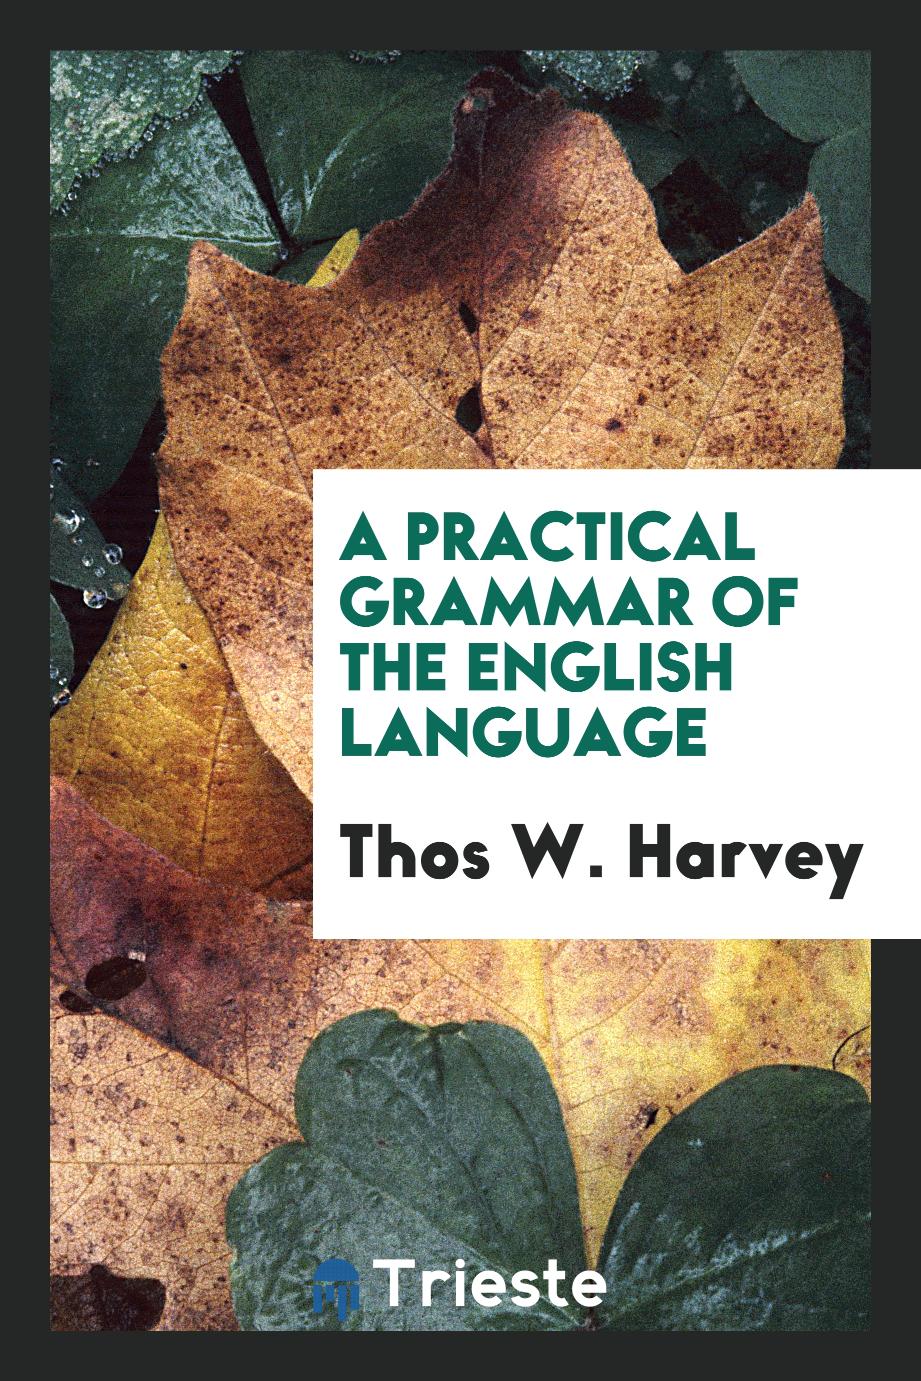 A practical grammar of the English language